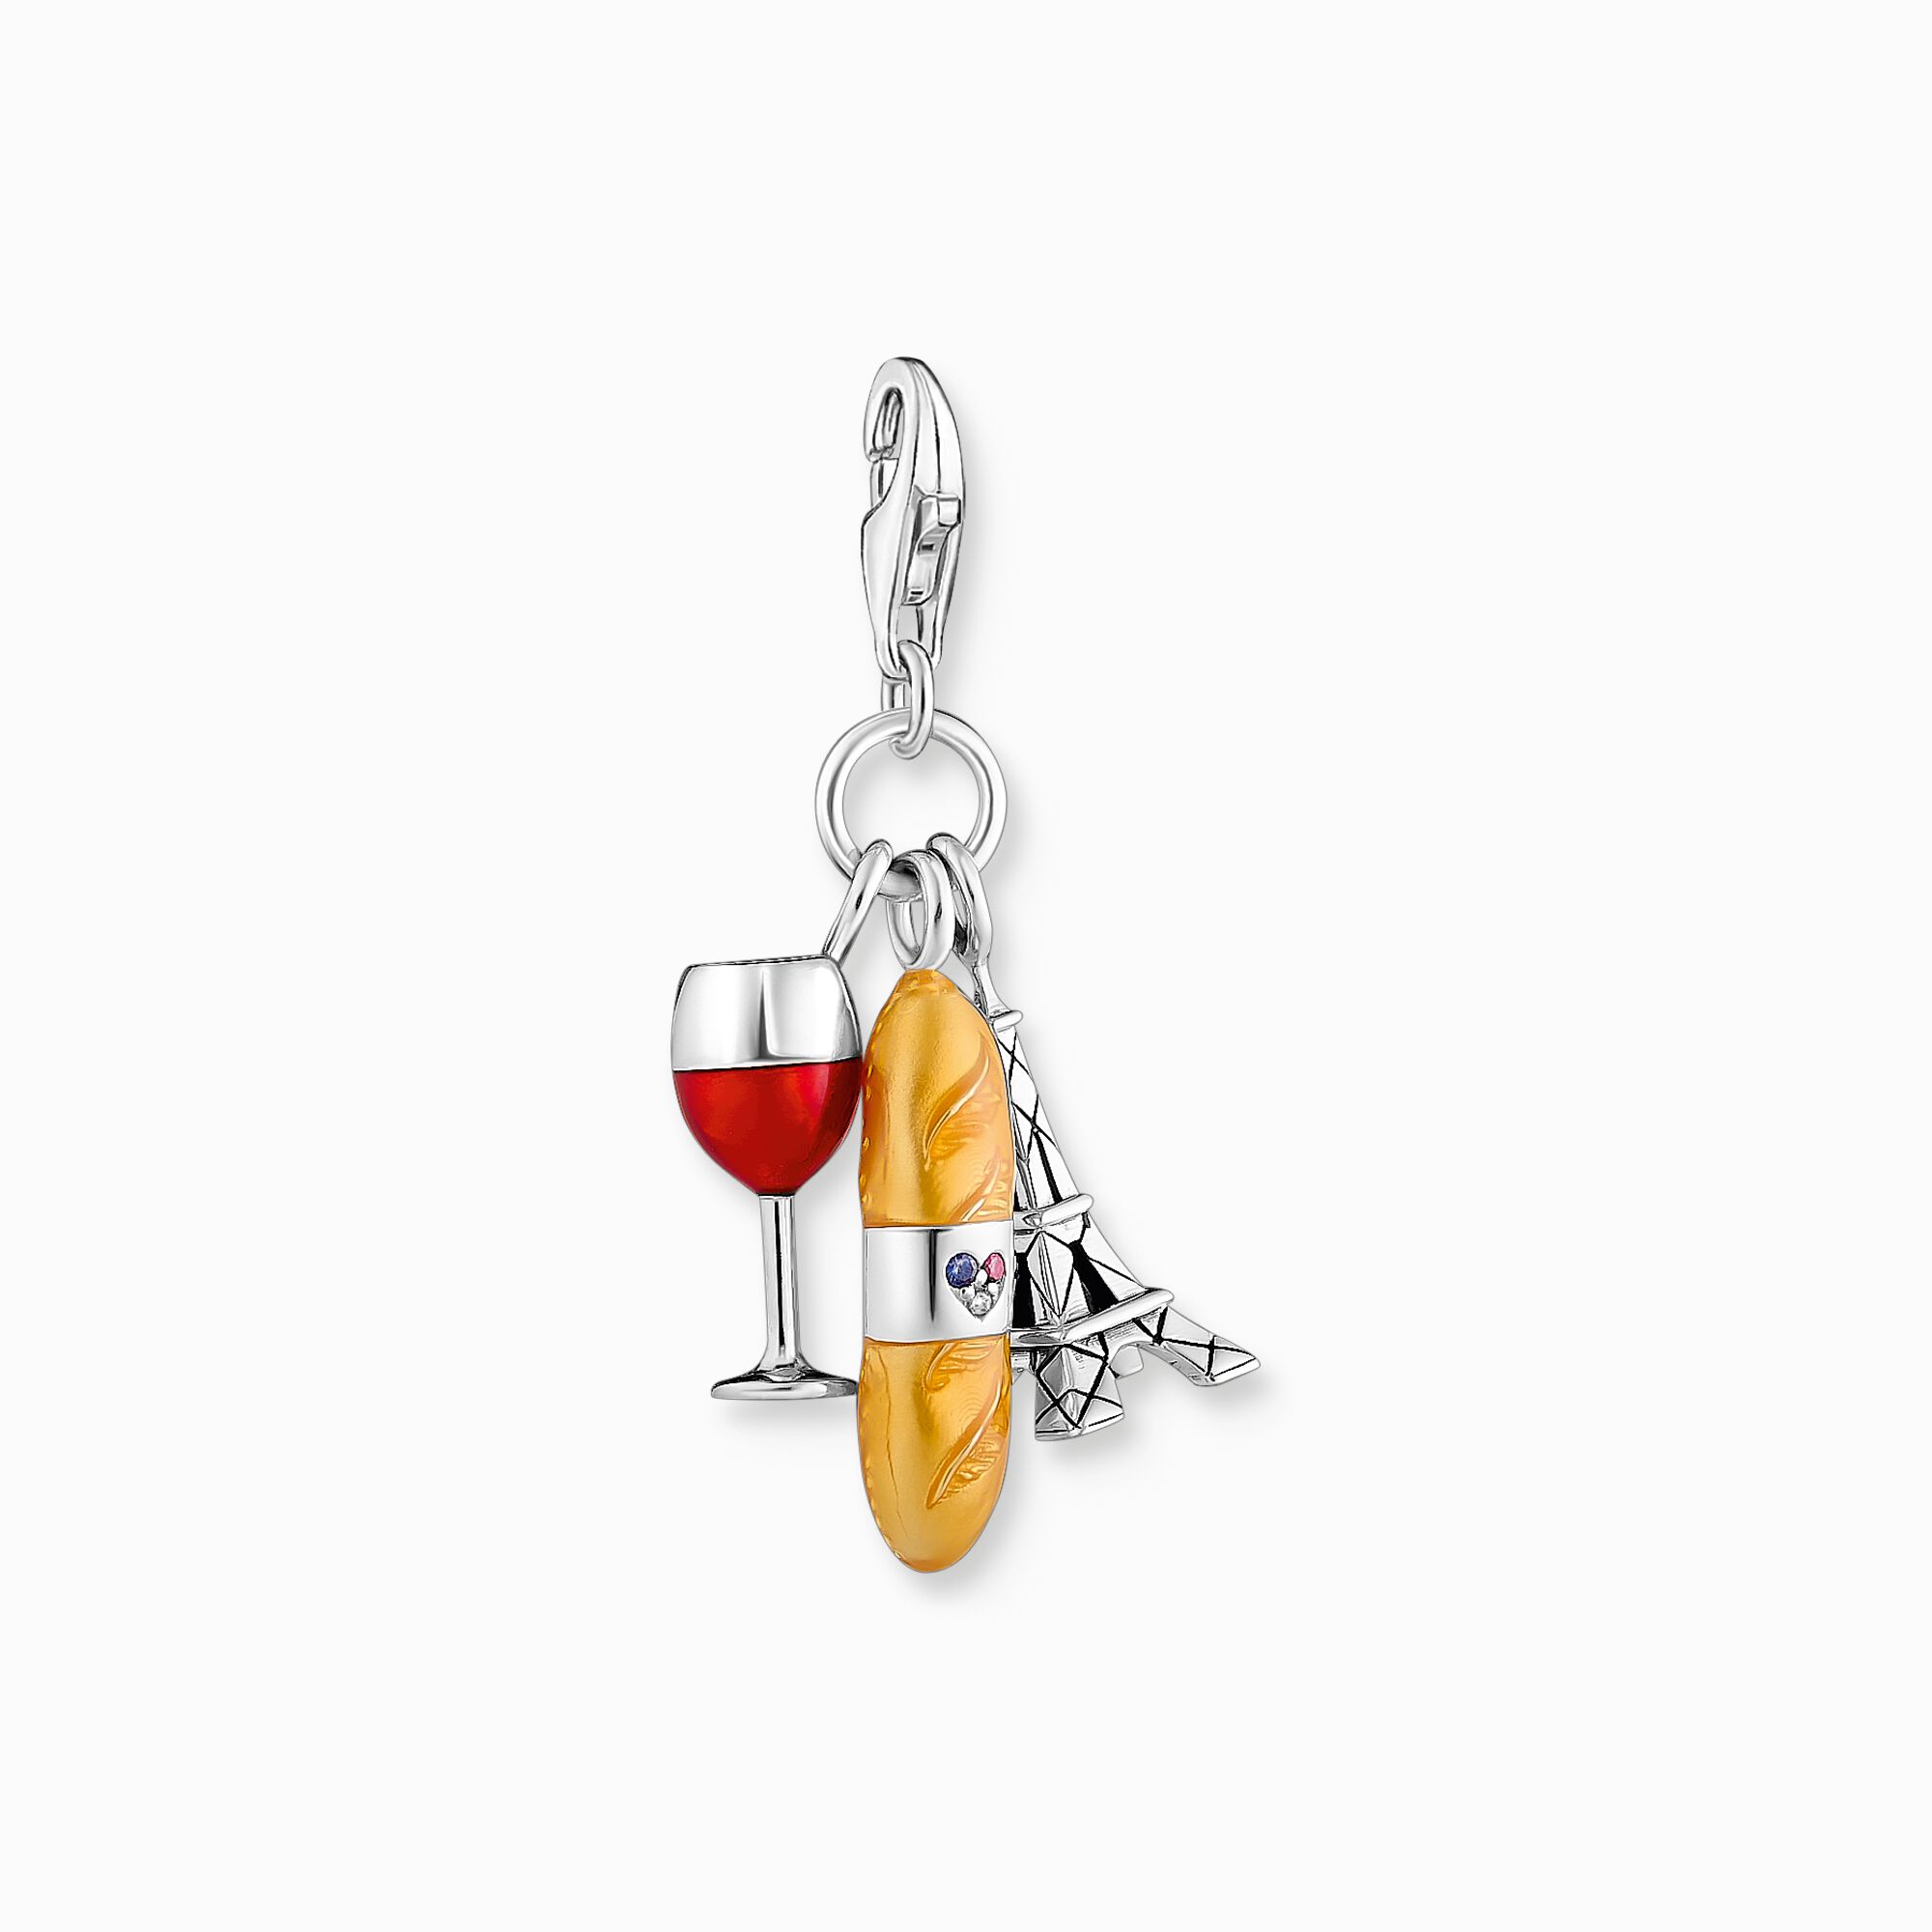 Silver charm pendant with red wine glass, Eiffel Tower &amp; baguette from the Charm Club collection in the THOMAS SABO online store